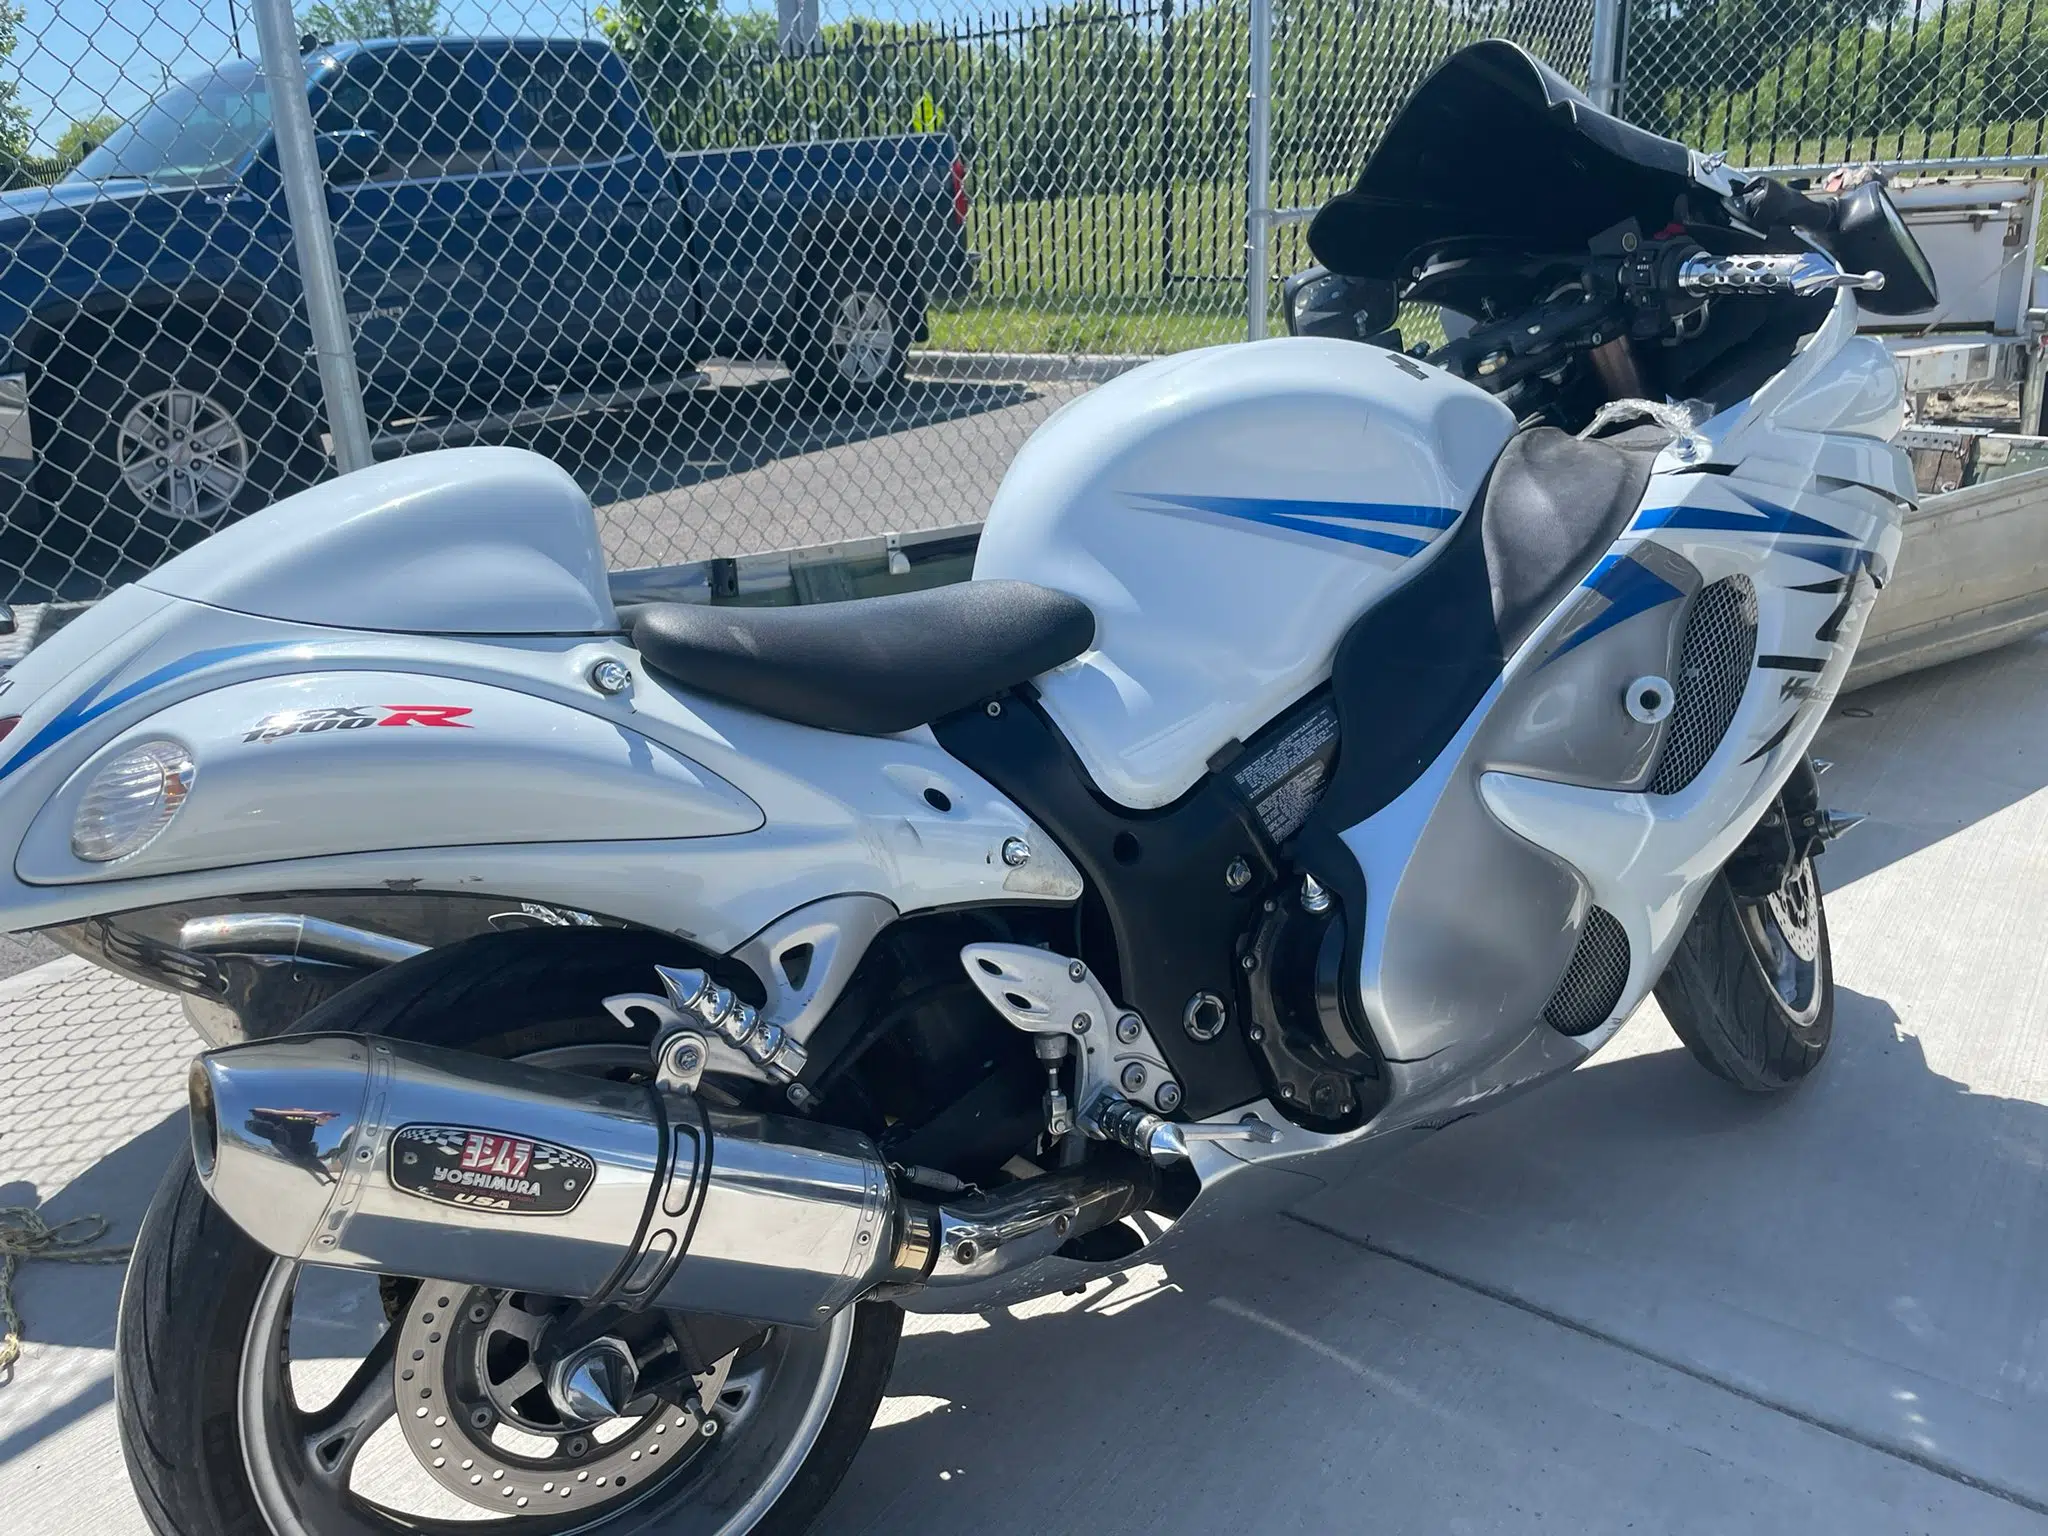 Stolen motorcycle involved in Trenton collision, prohibited firearm seized